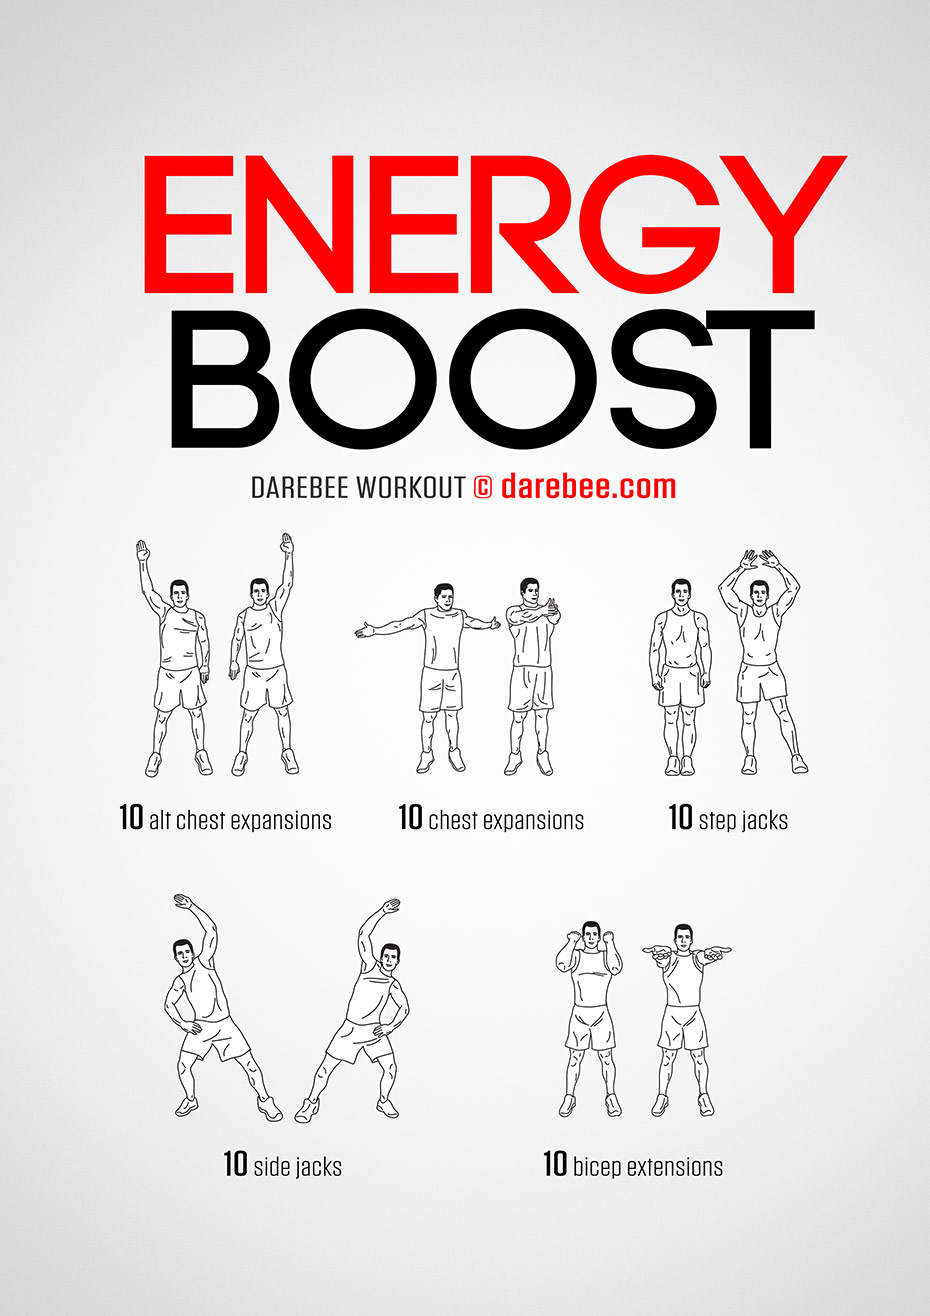 Boost energy for better workouts